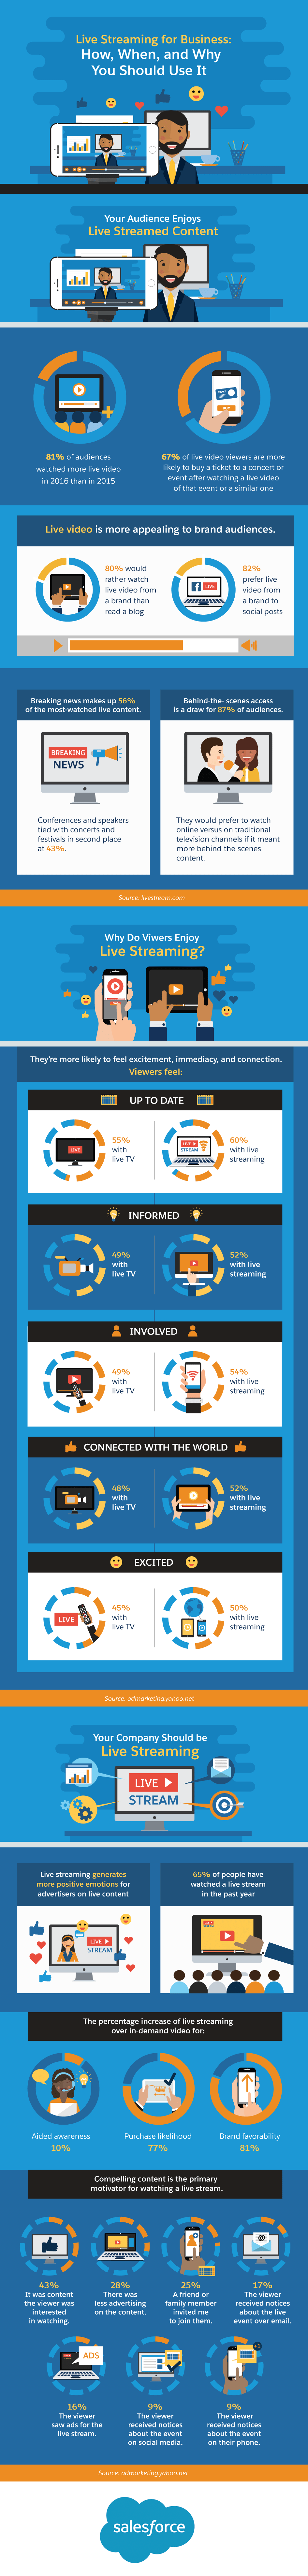 Live streaming for business infographic